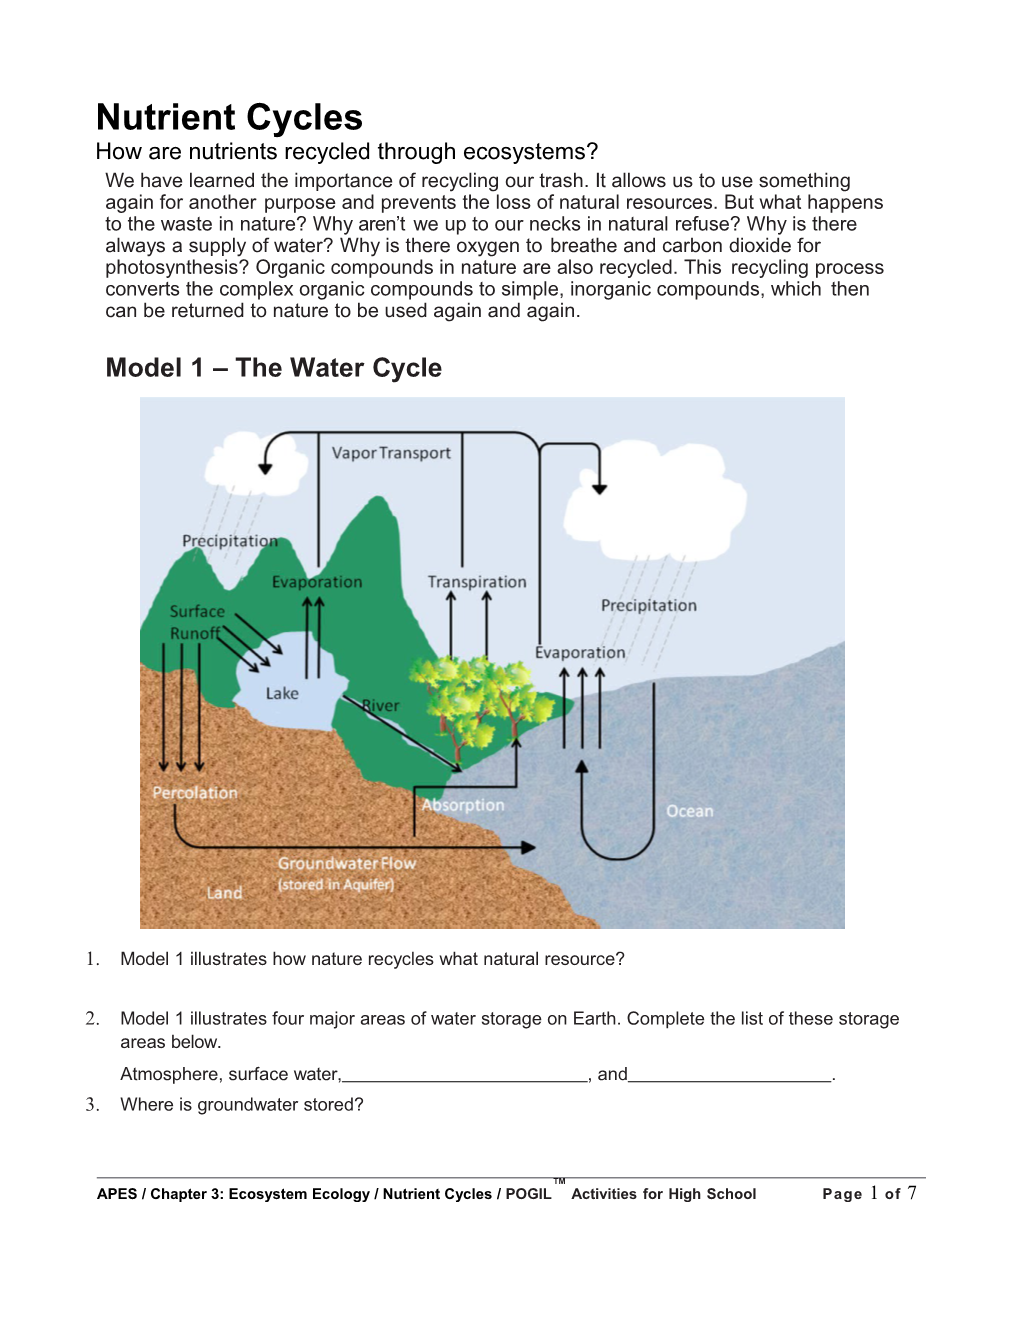 APES / Chapter 3: Ecosystem Ecology / Nutrient Cycles /POGIL Activitiesforhighschool Page